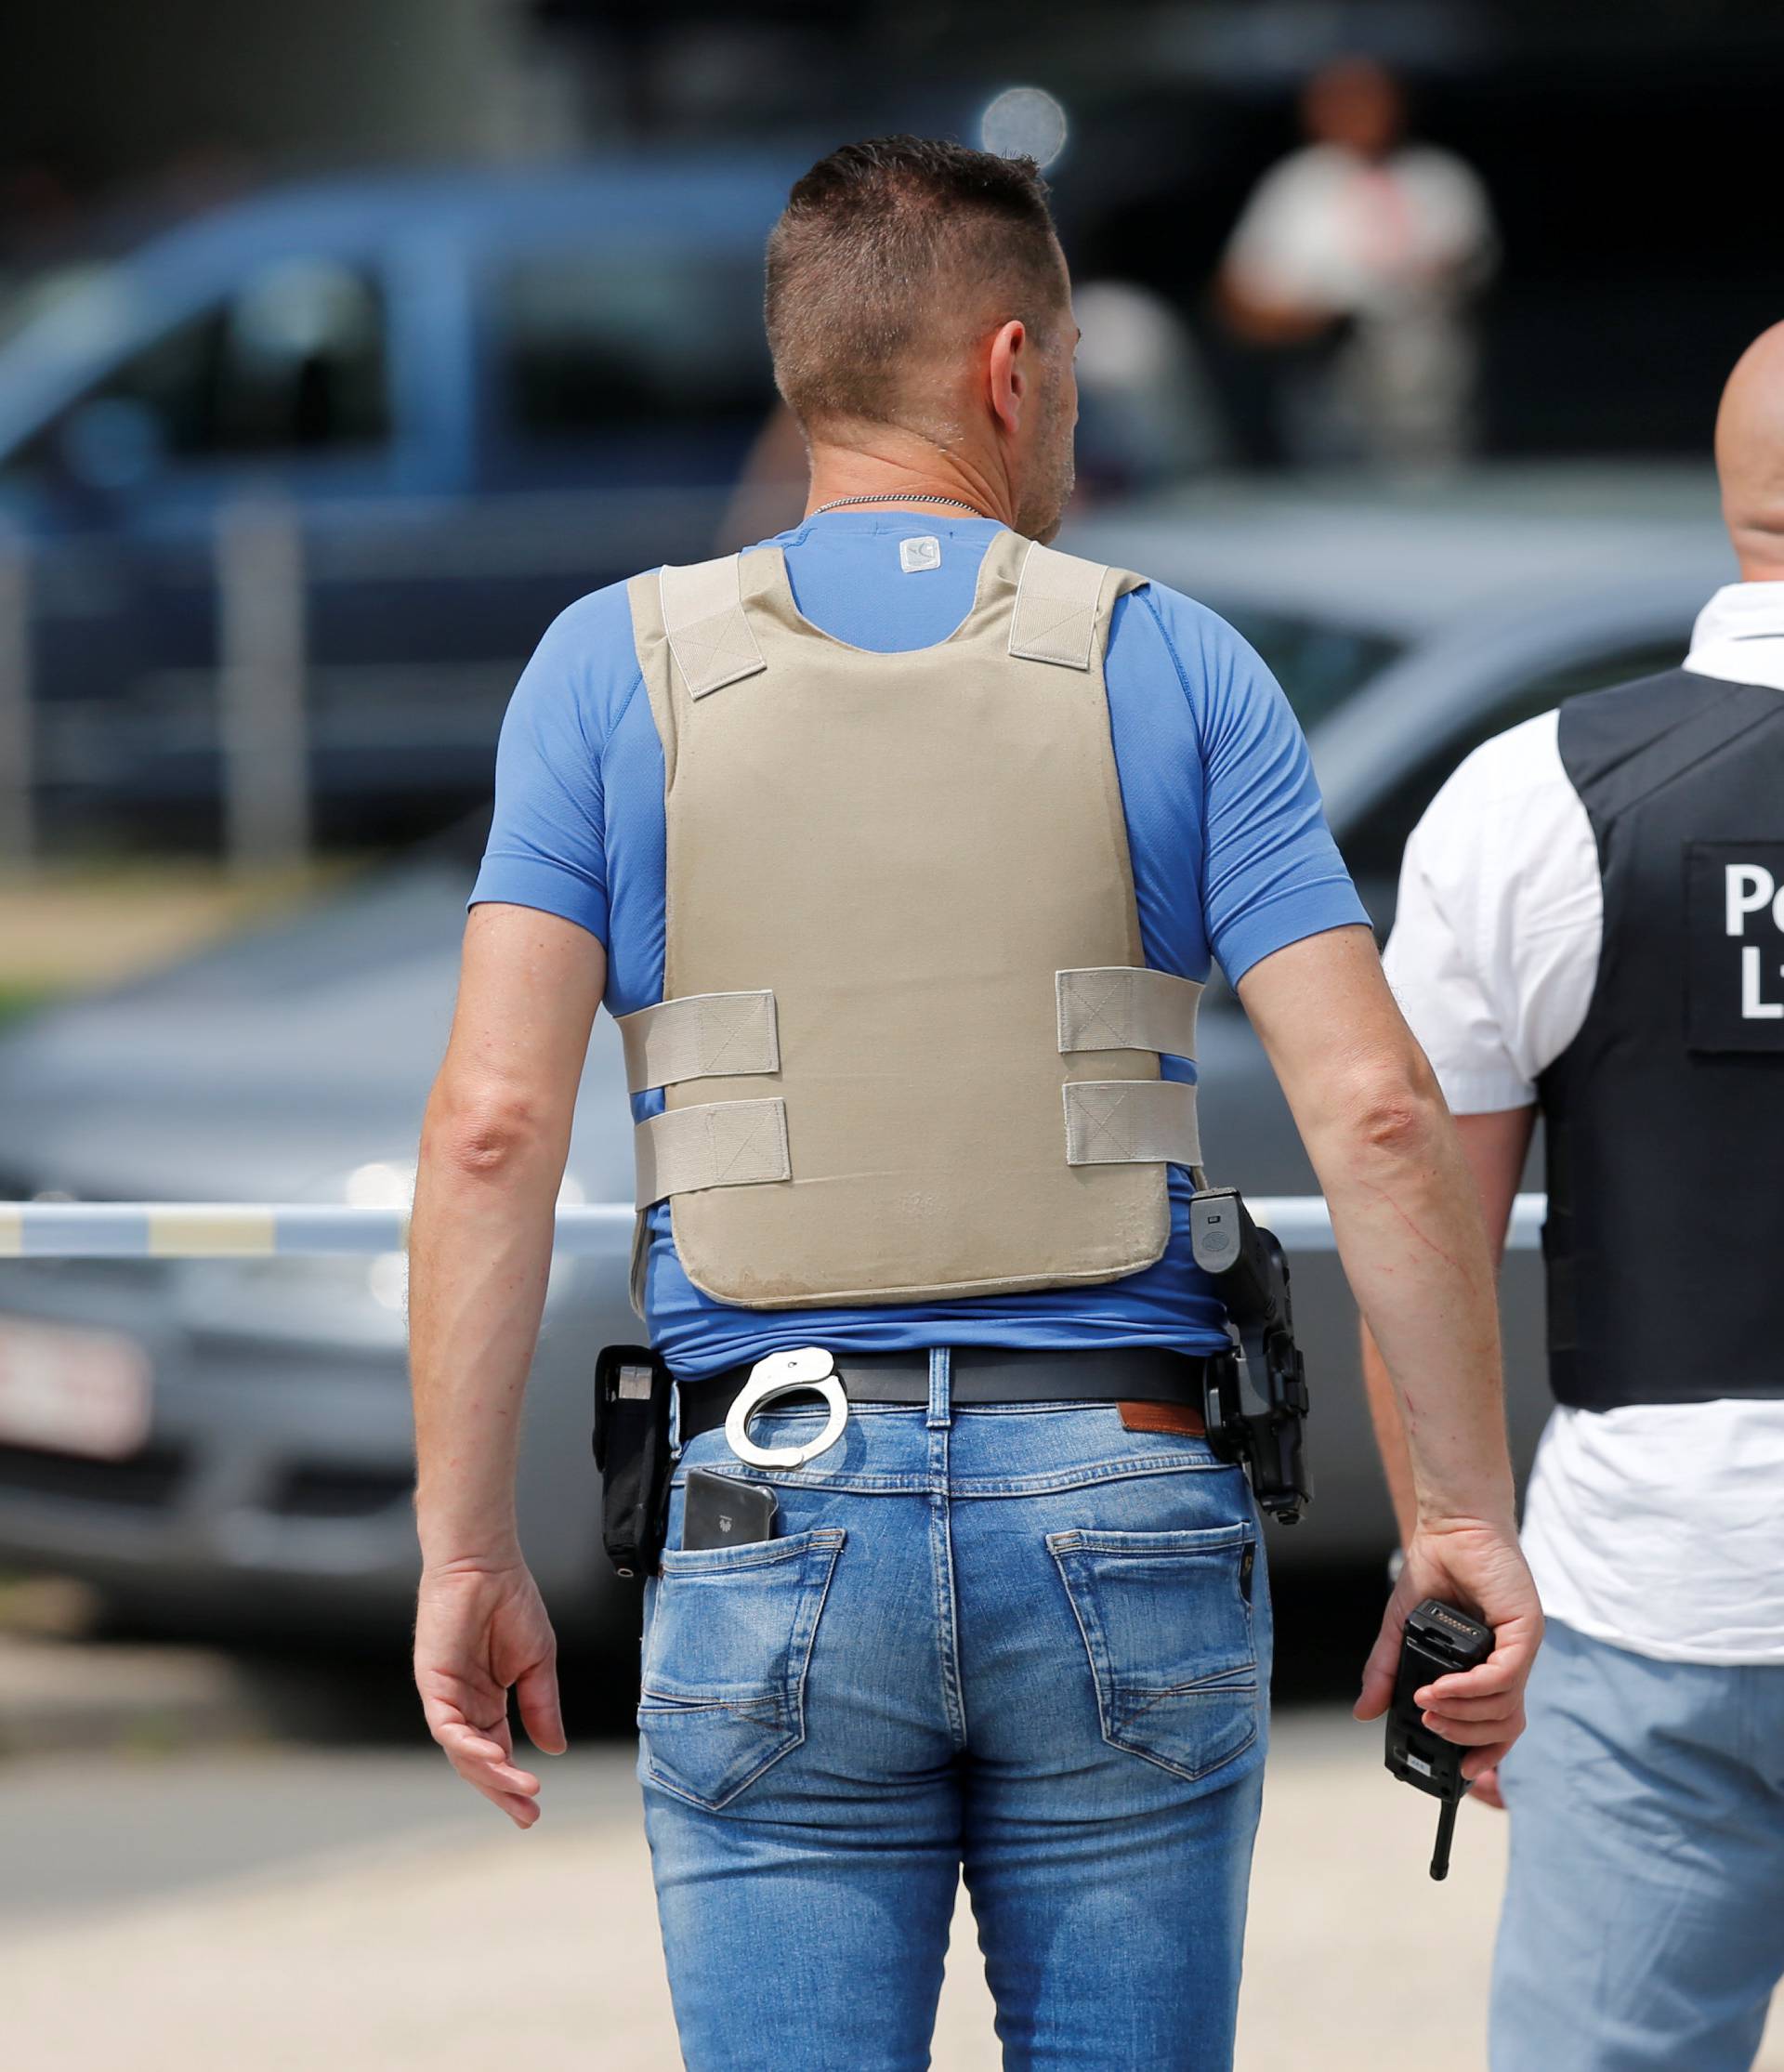 Police officers are seen on the scene of a shooting in Liege